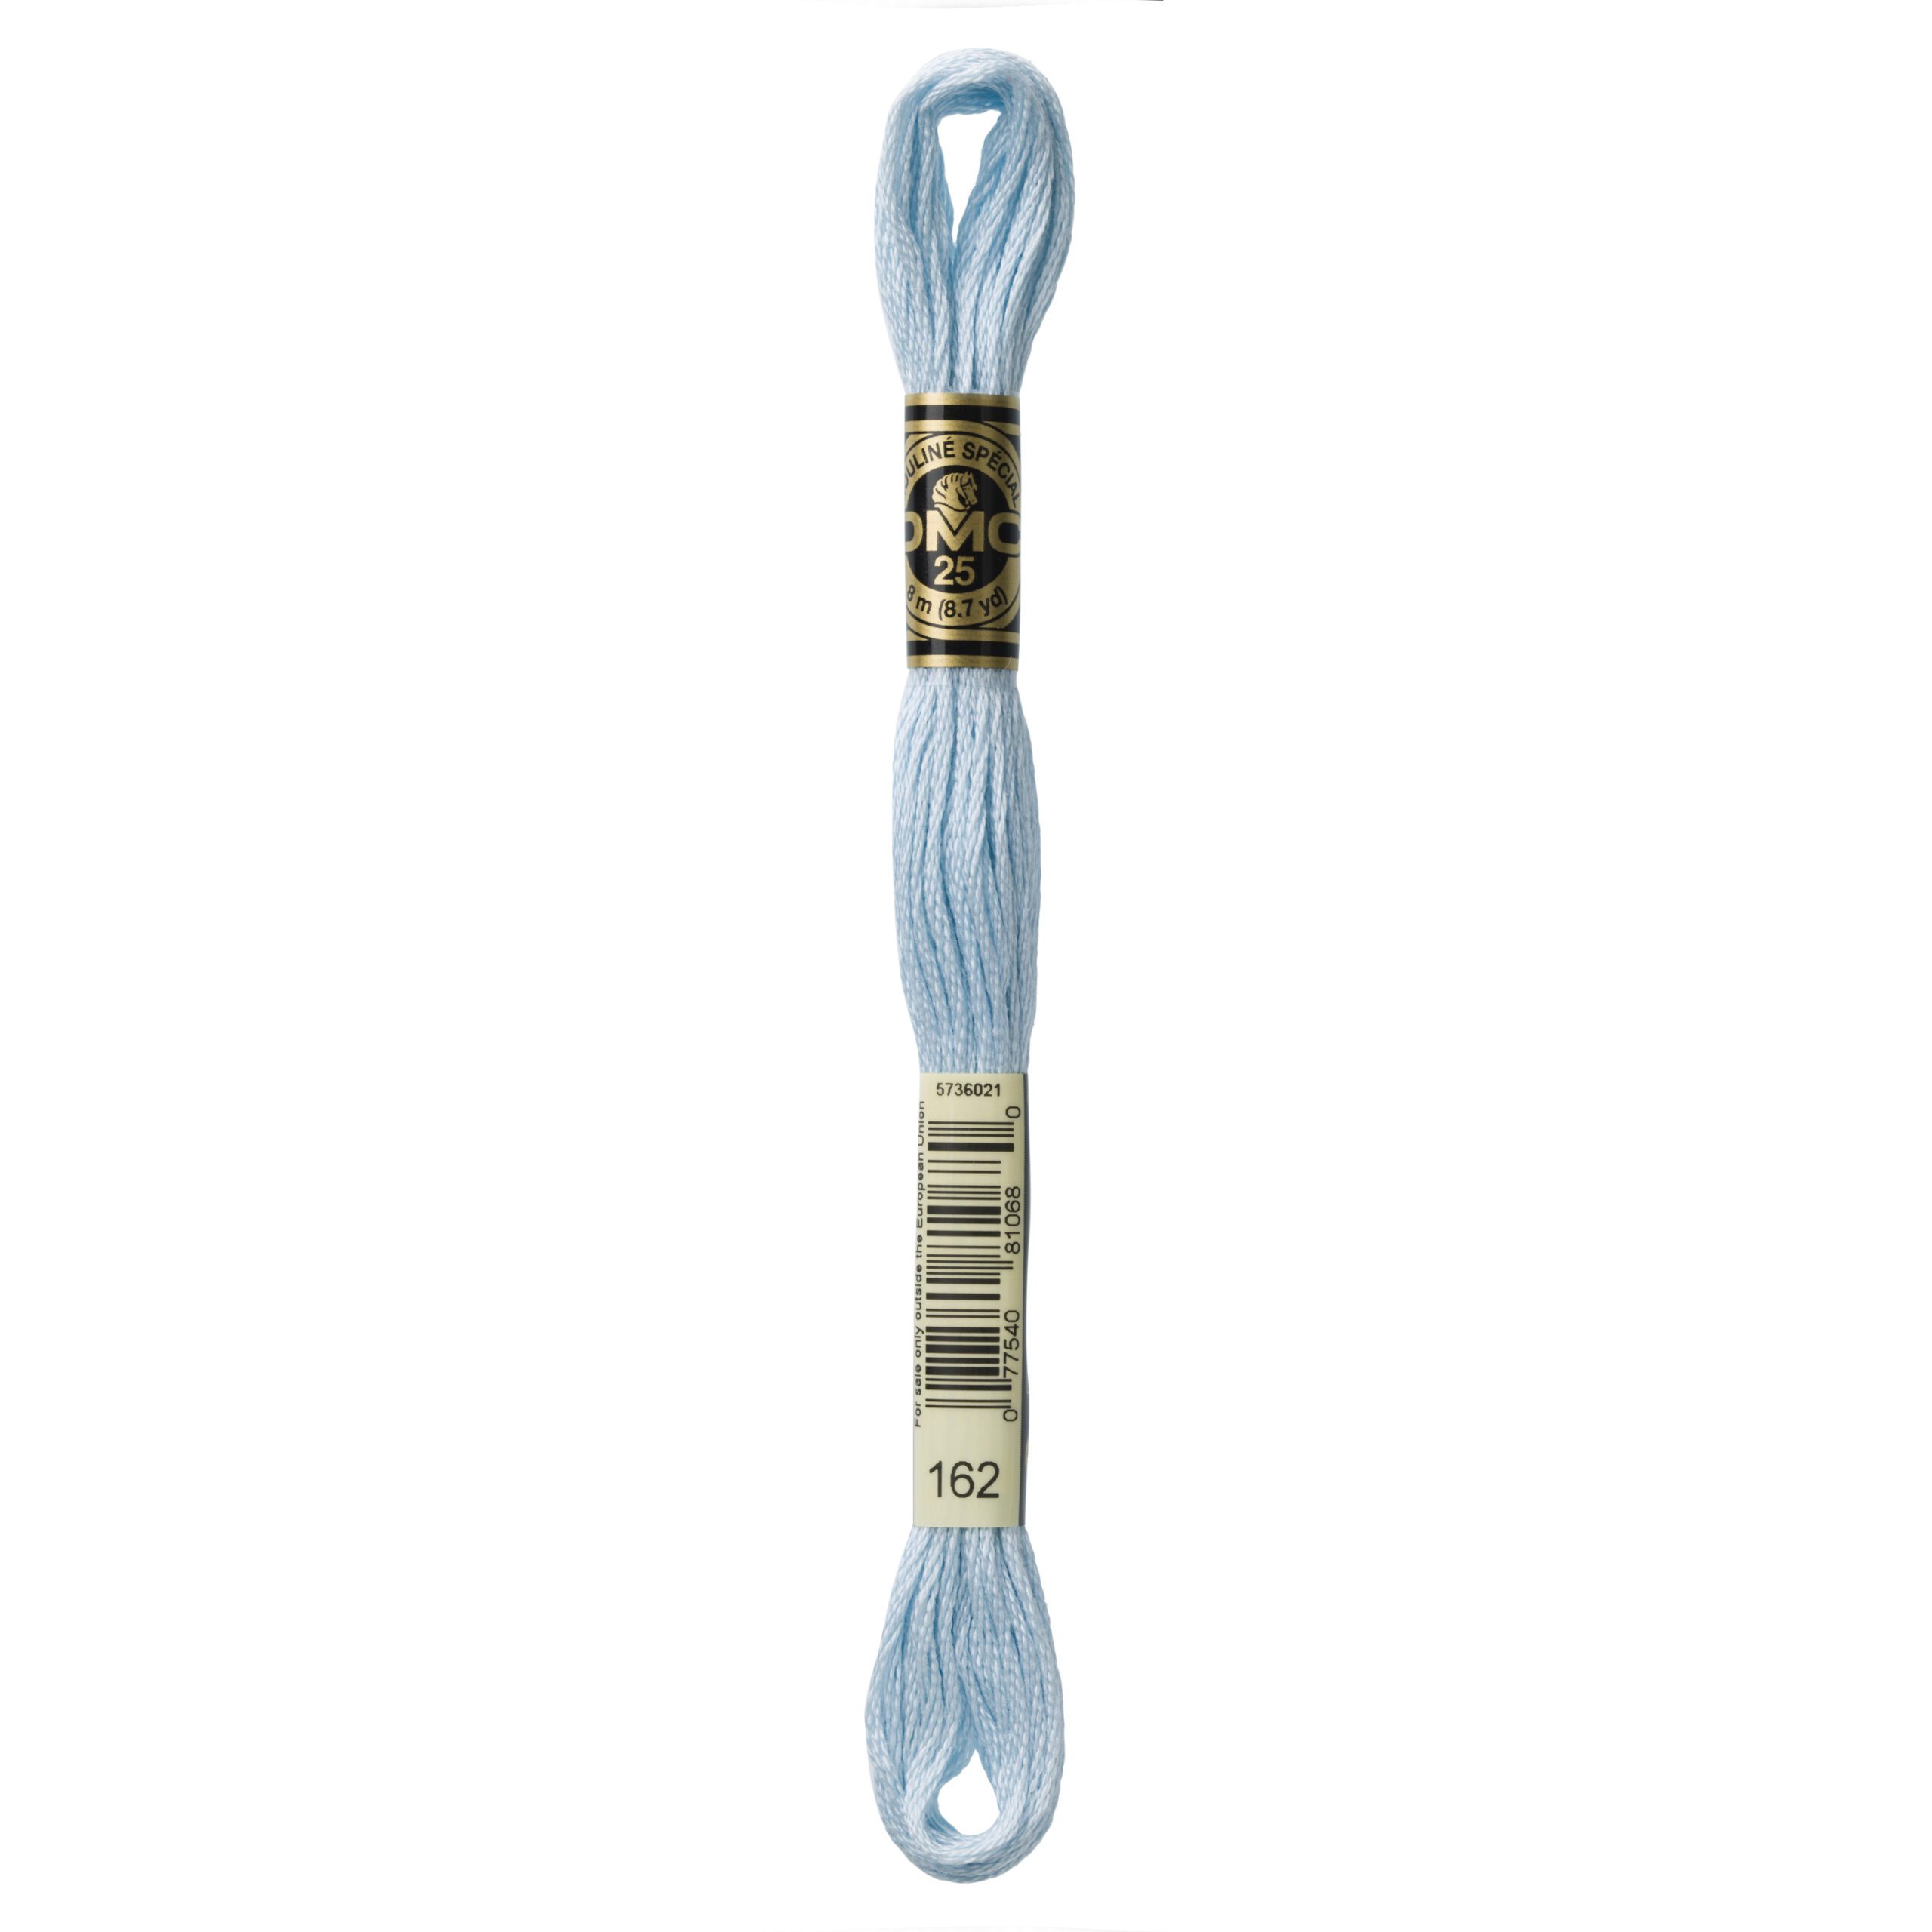 The Urban Store Embroidery Thread Ultra Very Light Blue DMC 988 RRP 1.40 CLEARANCE XL 99p